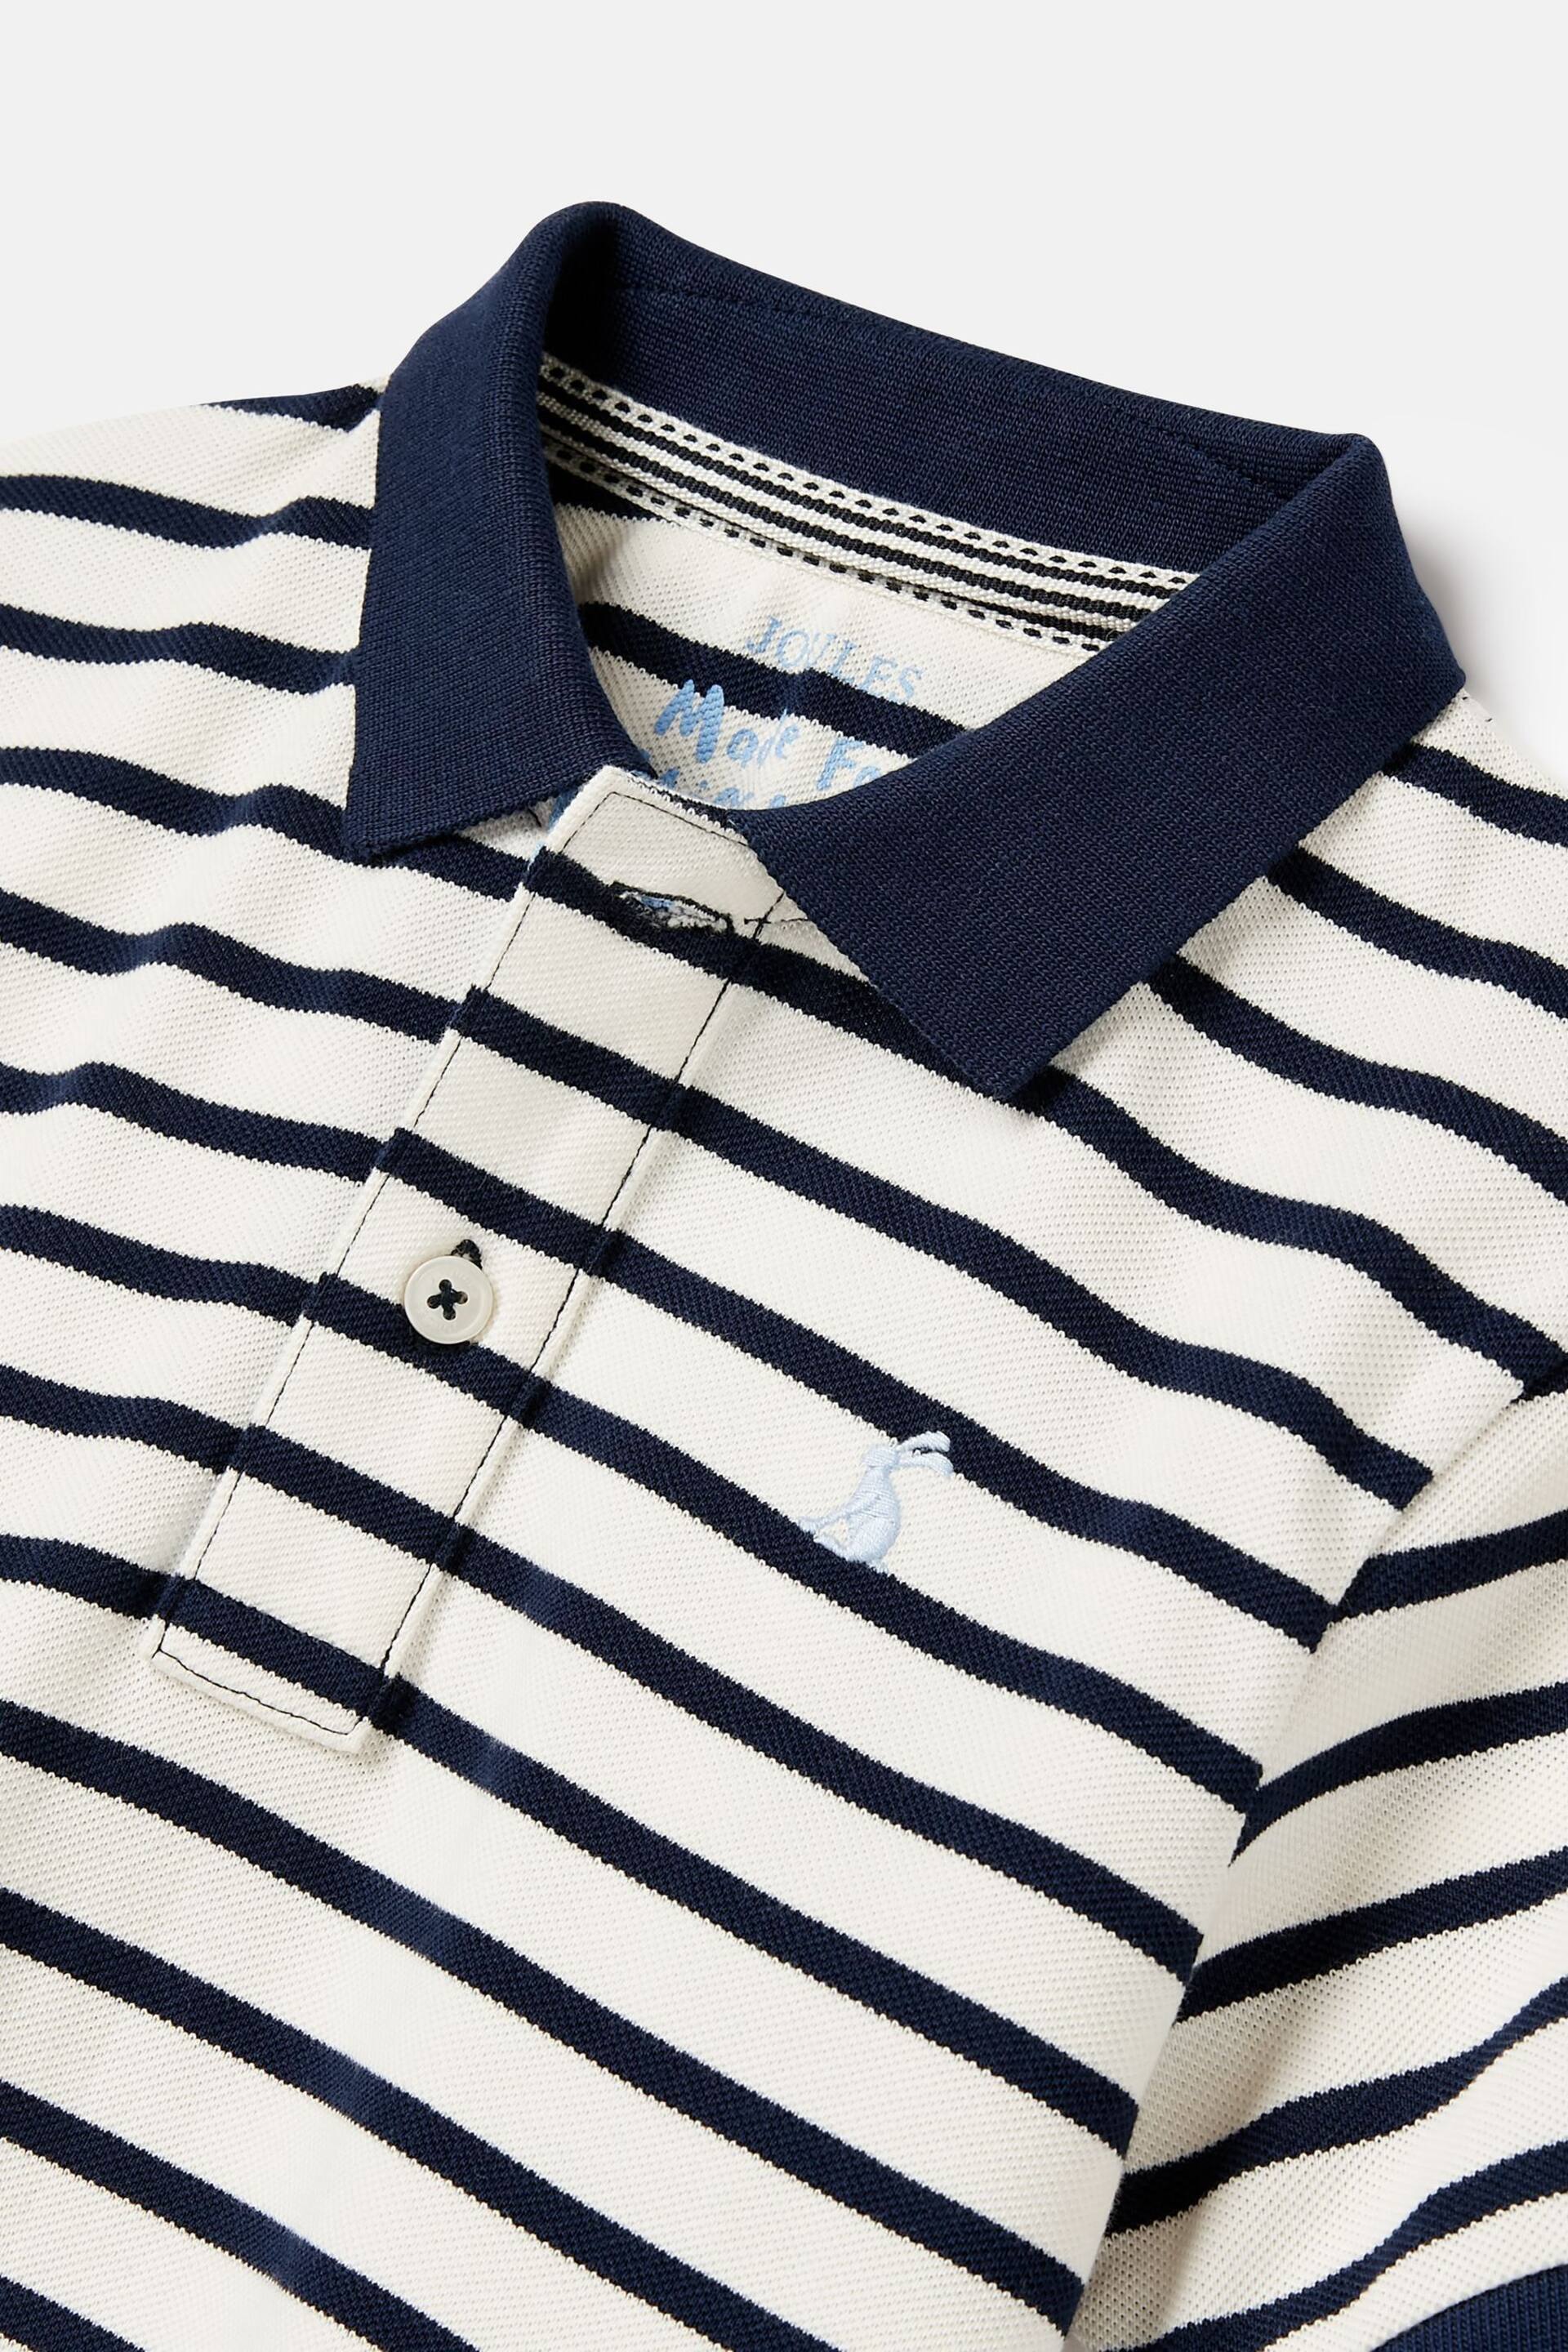 Joules Filbert Navy Blue Striped Pique Cotton Polo Shirt - Image 3 of 5